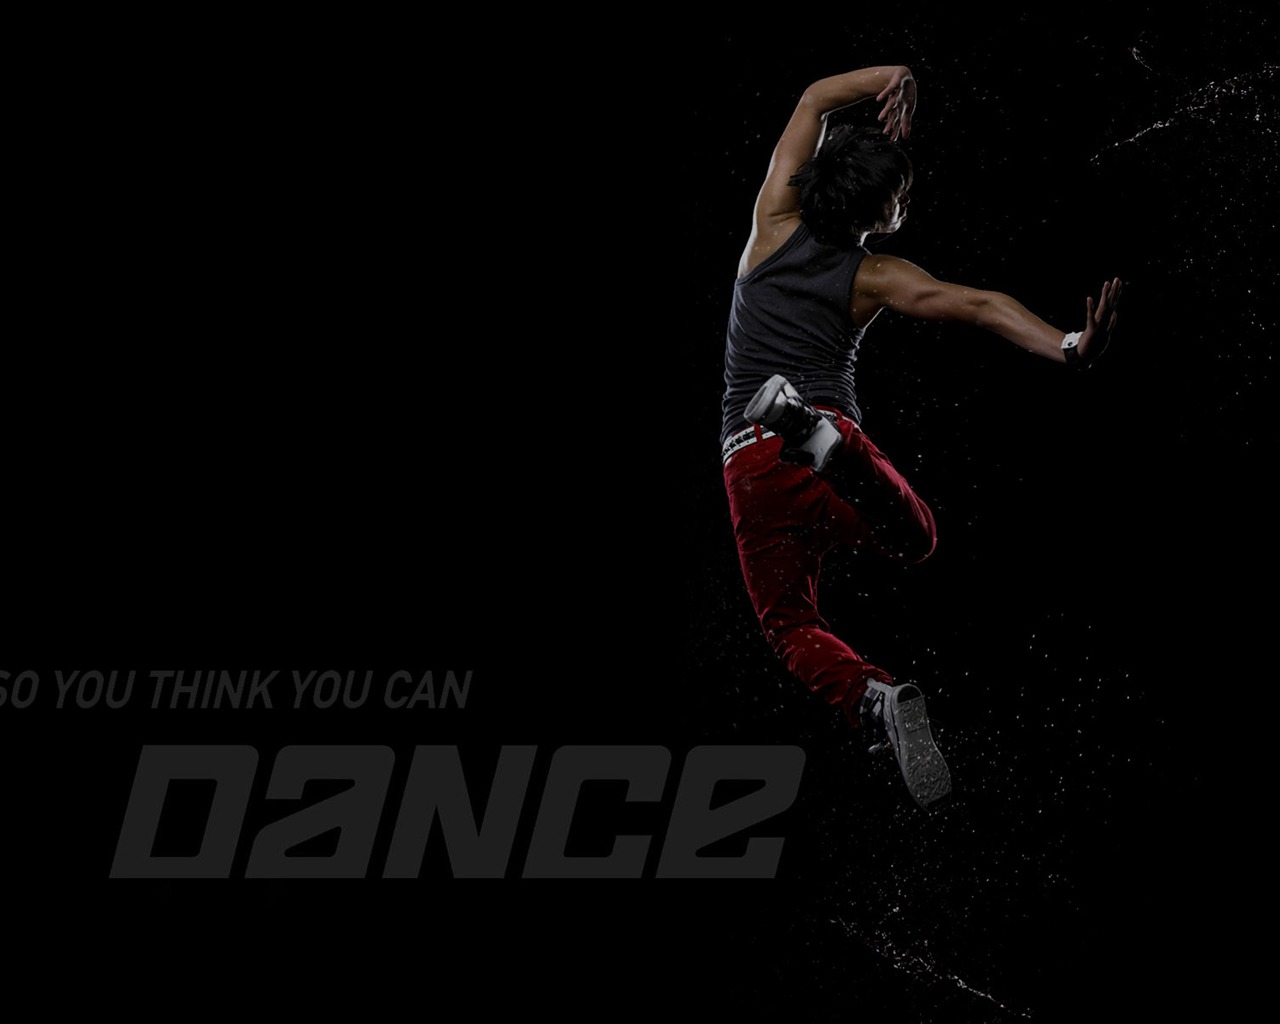 So You Think You Can Dance wallpaper (2) #12 - 1280x1024